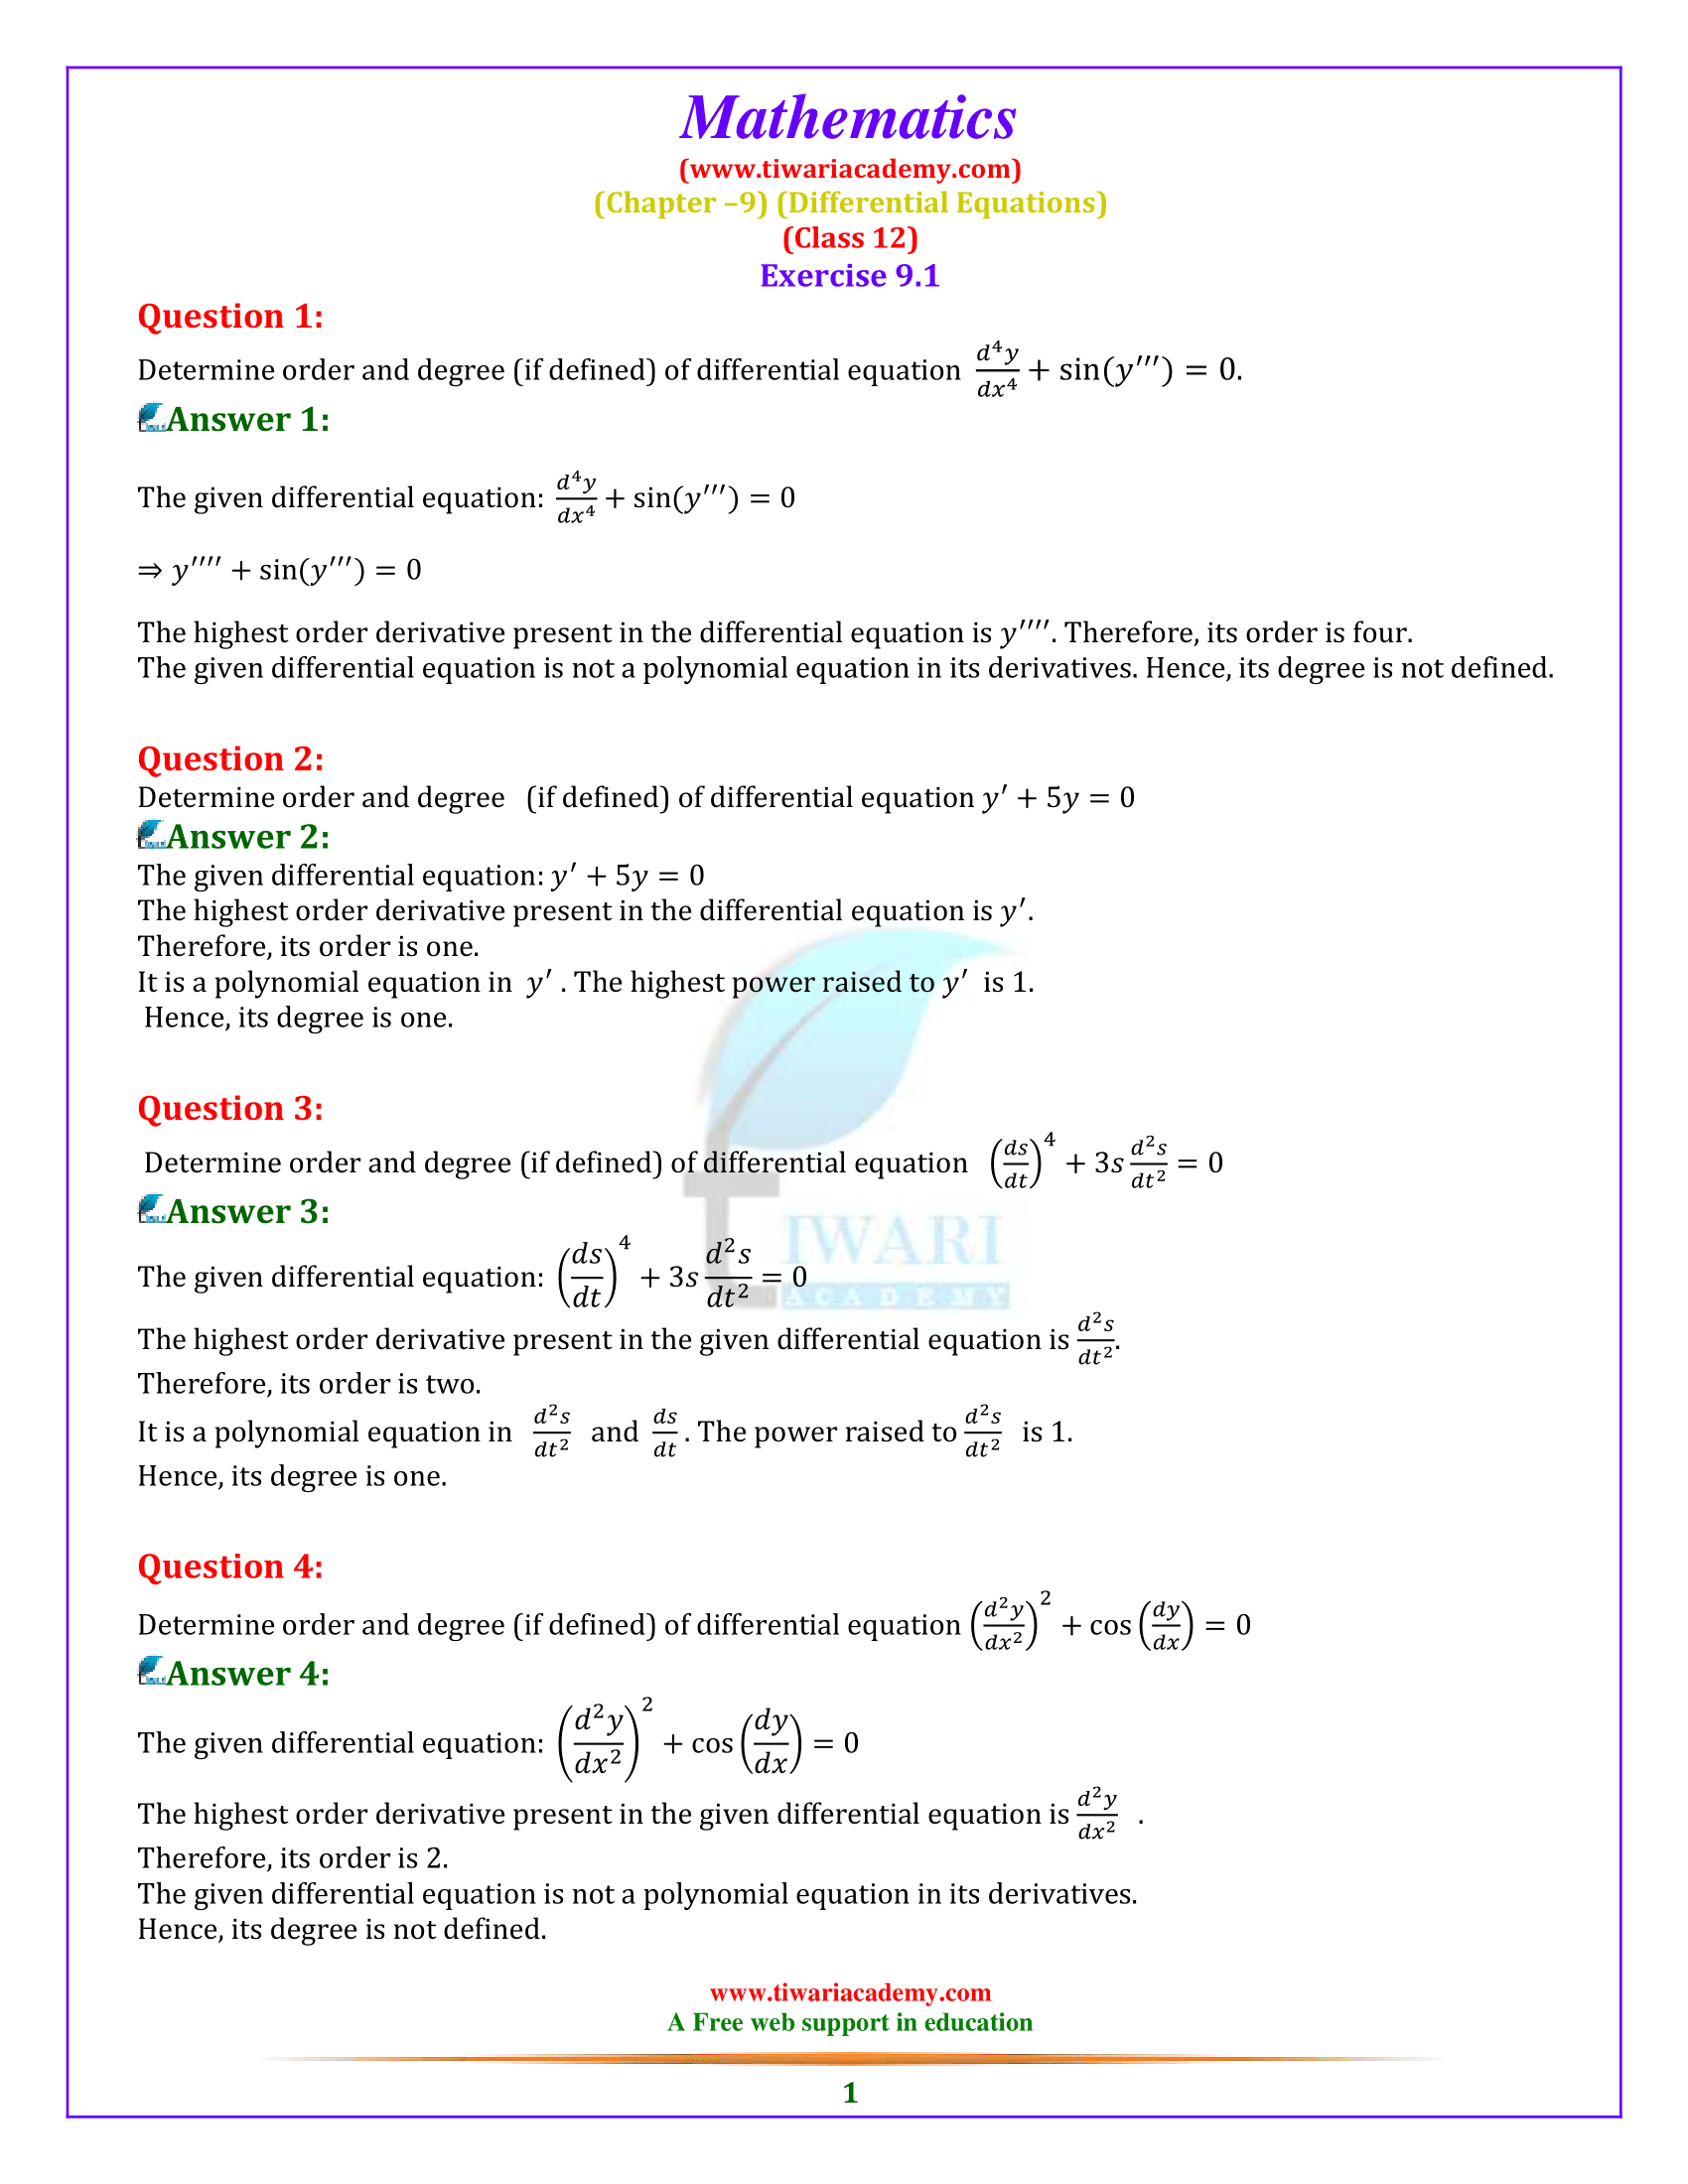 Class 12 Maths Exercise 9.1 Solutions in English Medium